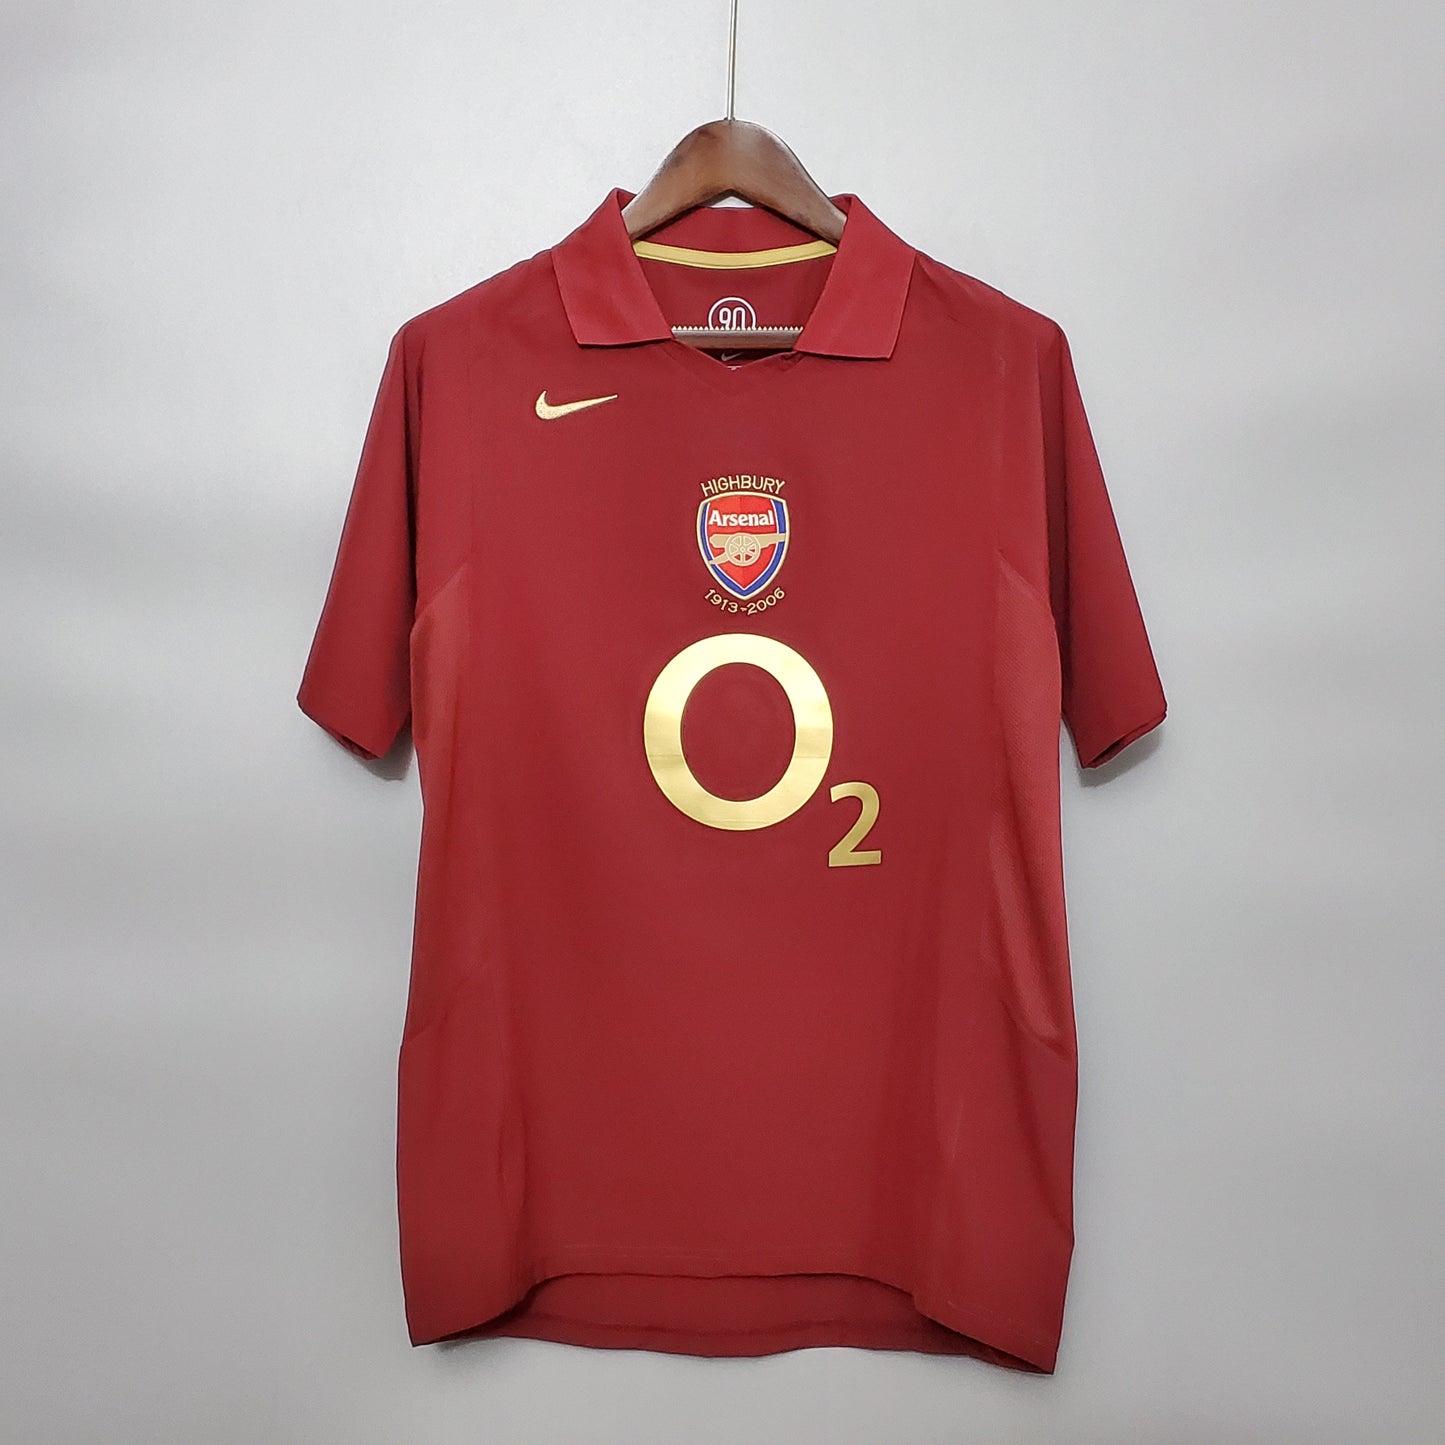 Arsenal 2005/06 Home Jersey